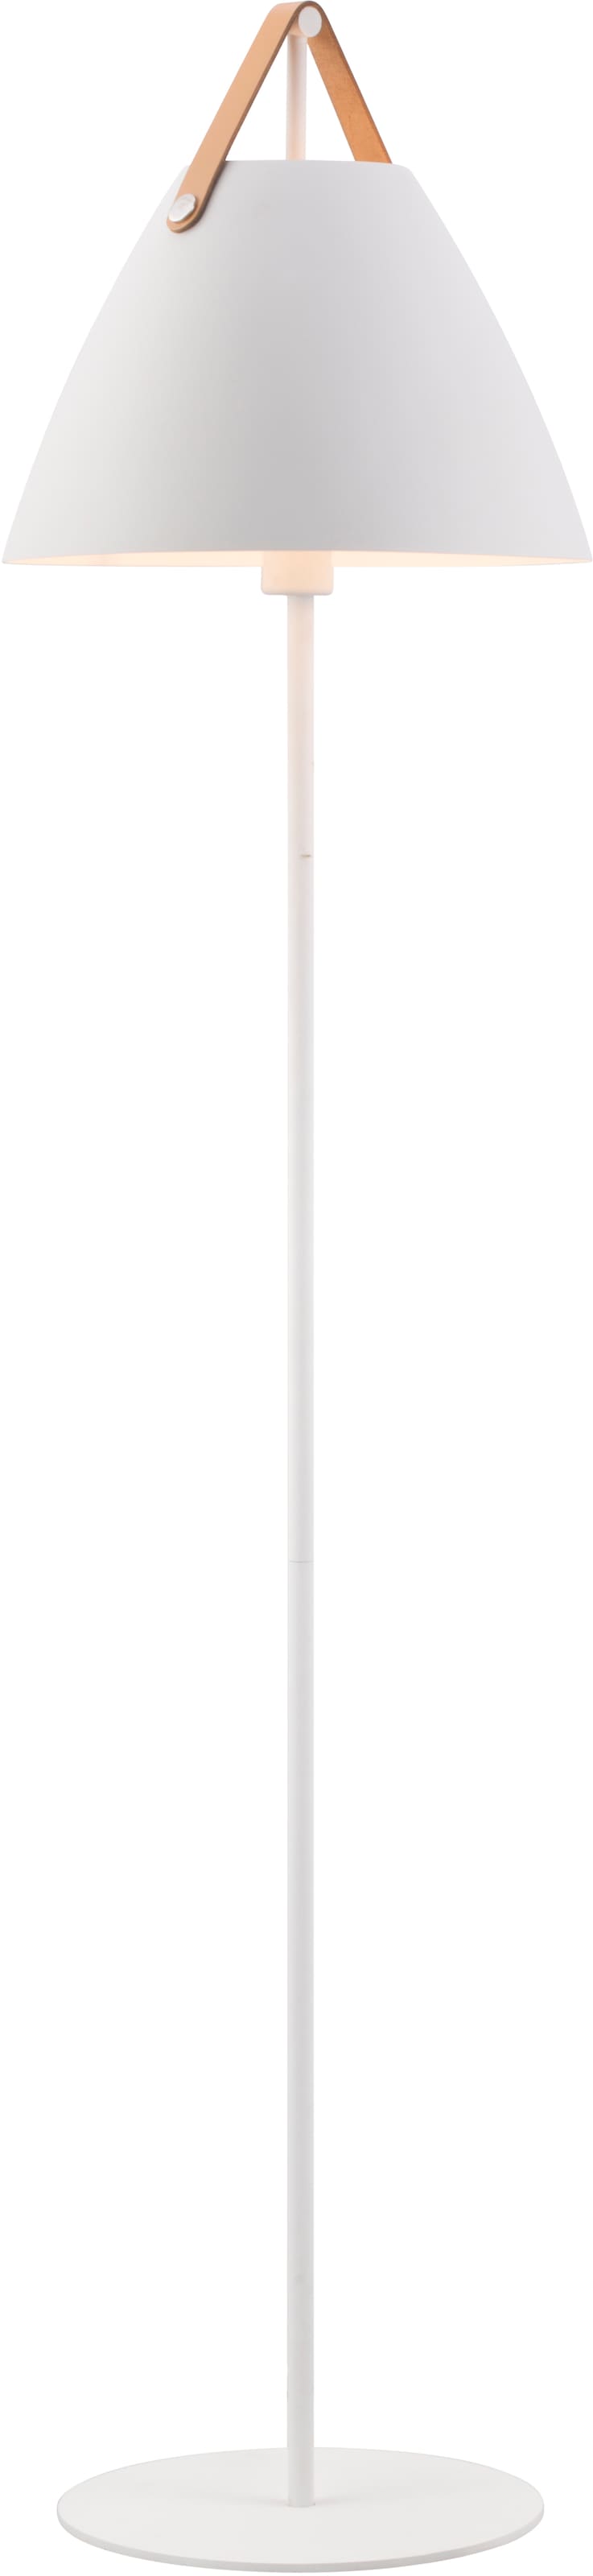 design for the people Stehlampe »Strap«, 1 flammig-flammig